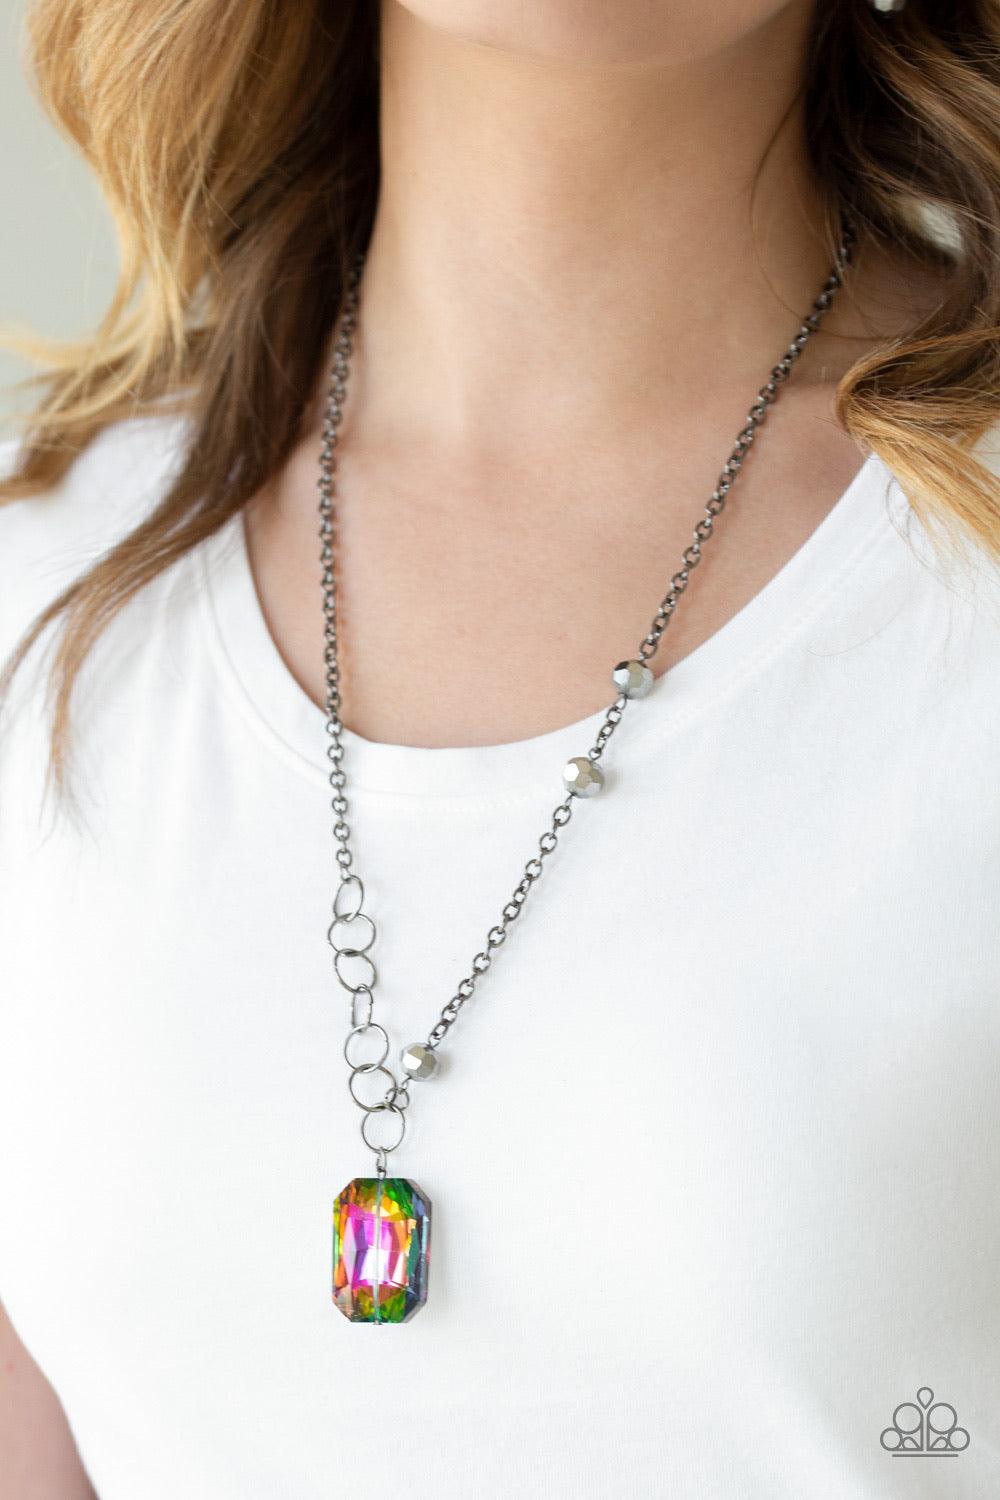 Paparazzi Accessories Never A Dull Moment - Multi A trio of faceted hematite crystal-like beads asymmetrically trickle along a mismatched gunmetal chain. Featuring a regal emerald-cut, an oversized rainbow gem swings from the bottom of the gunmetal chain